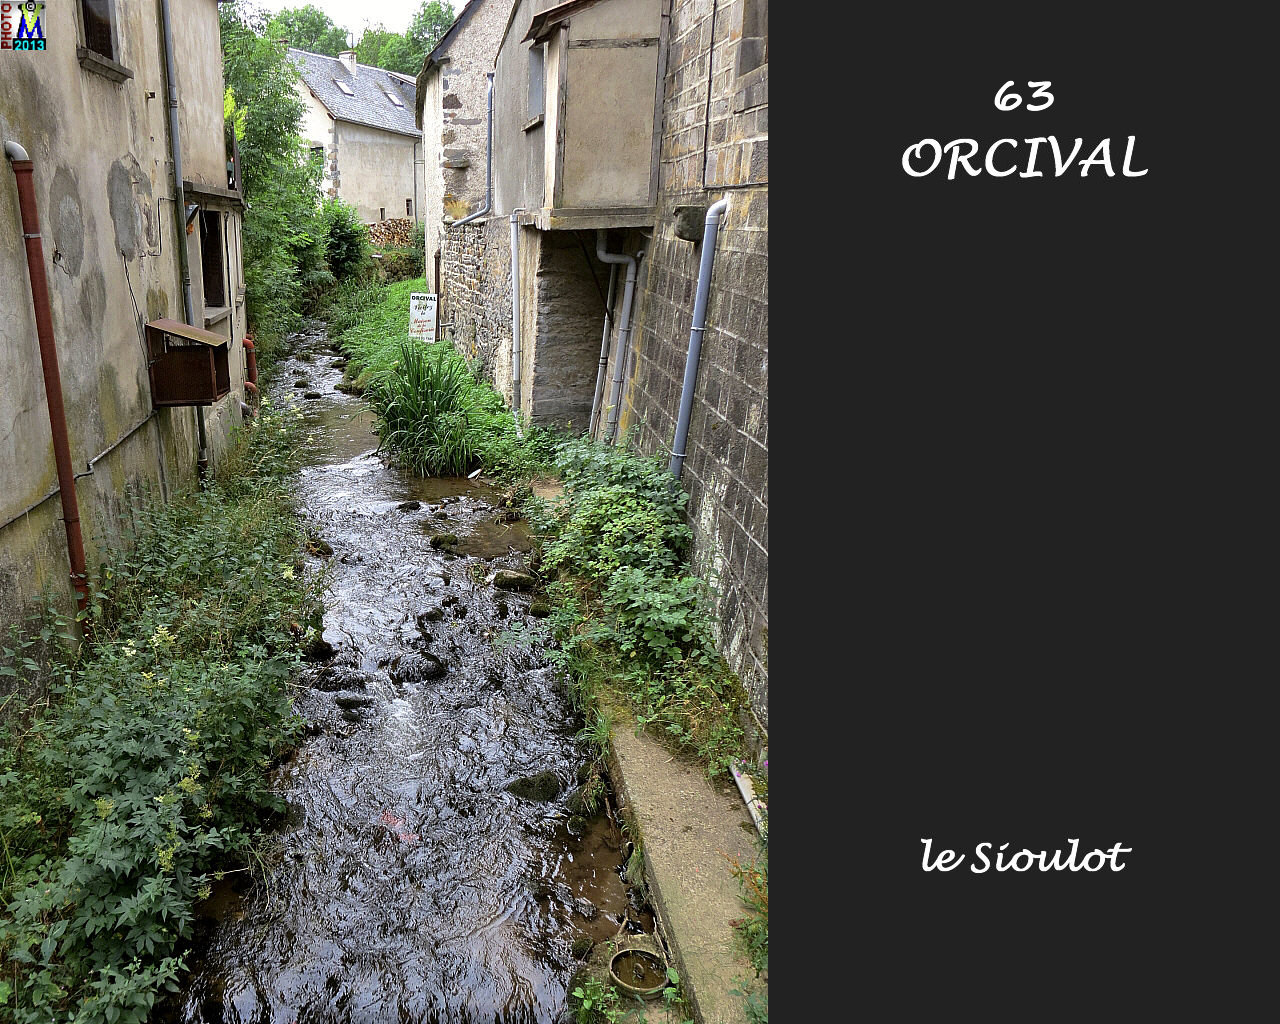 63ORCIVAL_sioulot_100.jpg